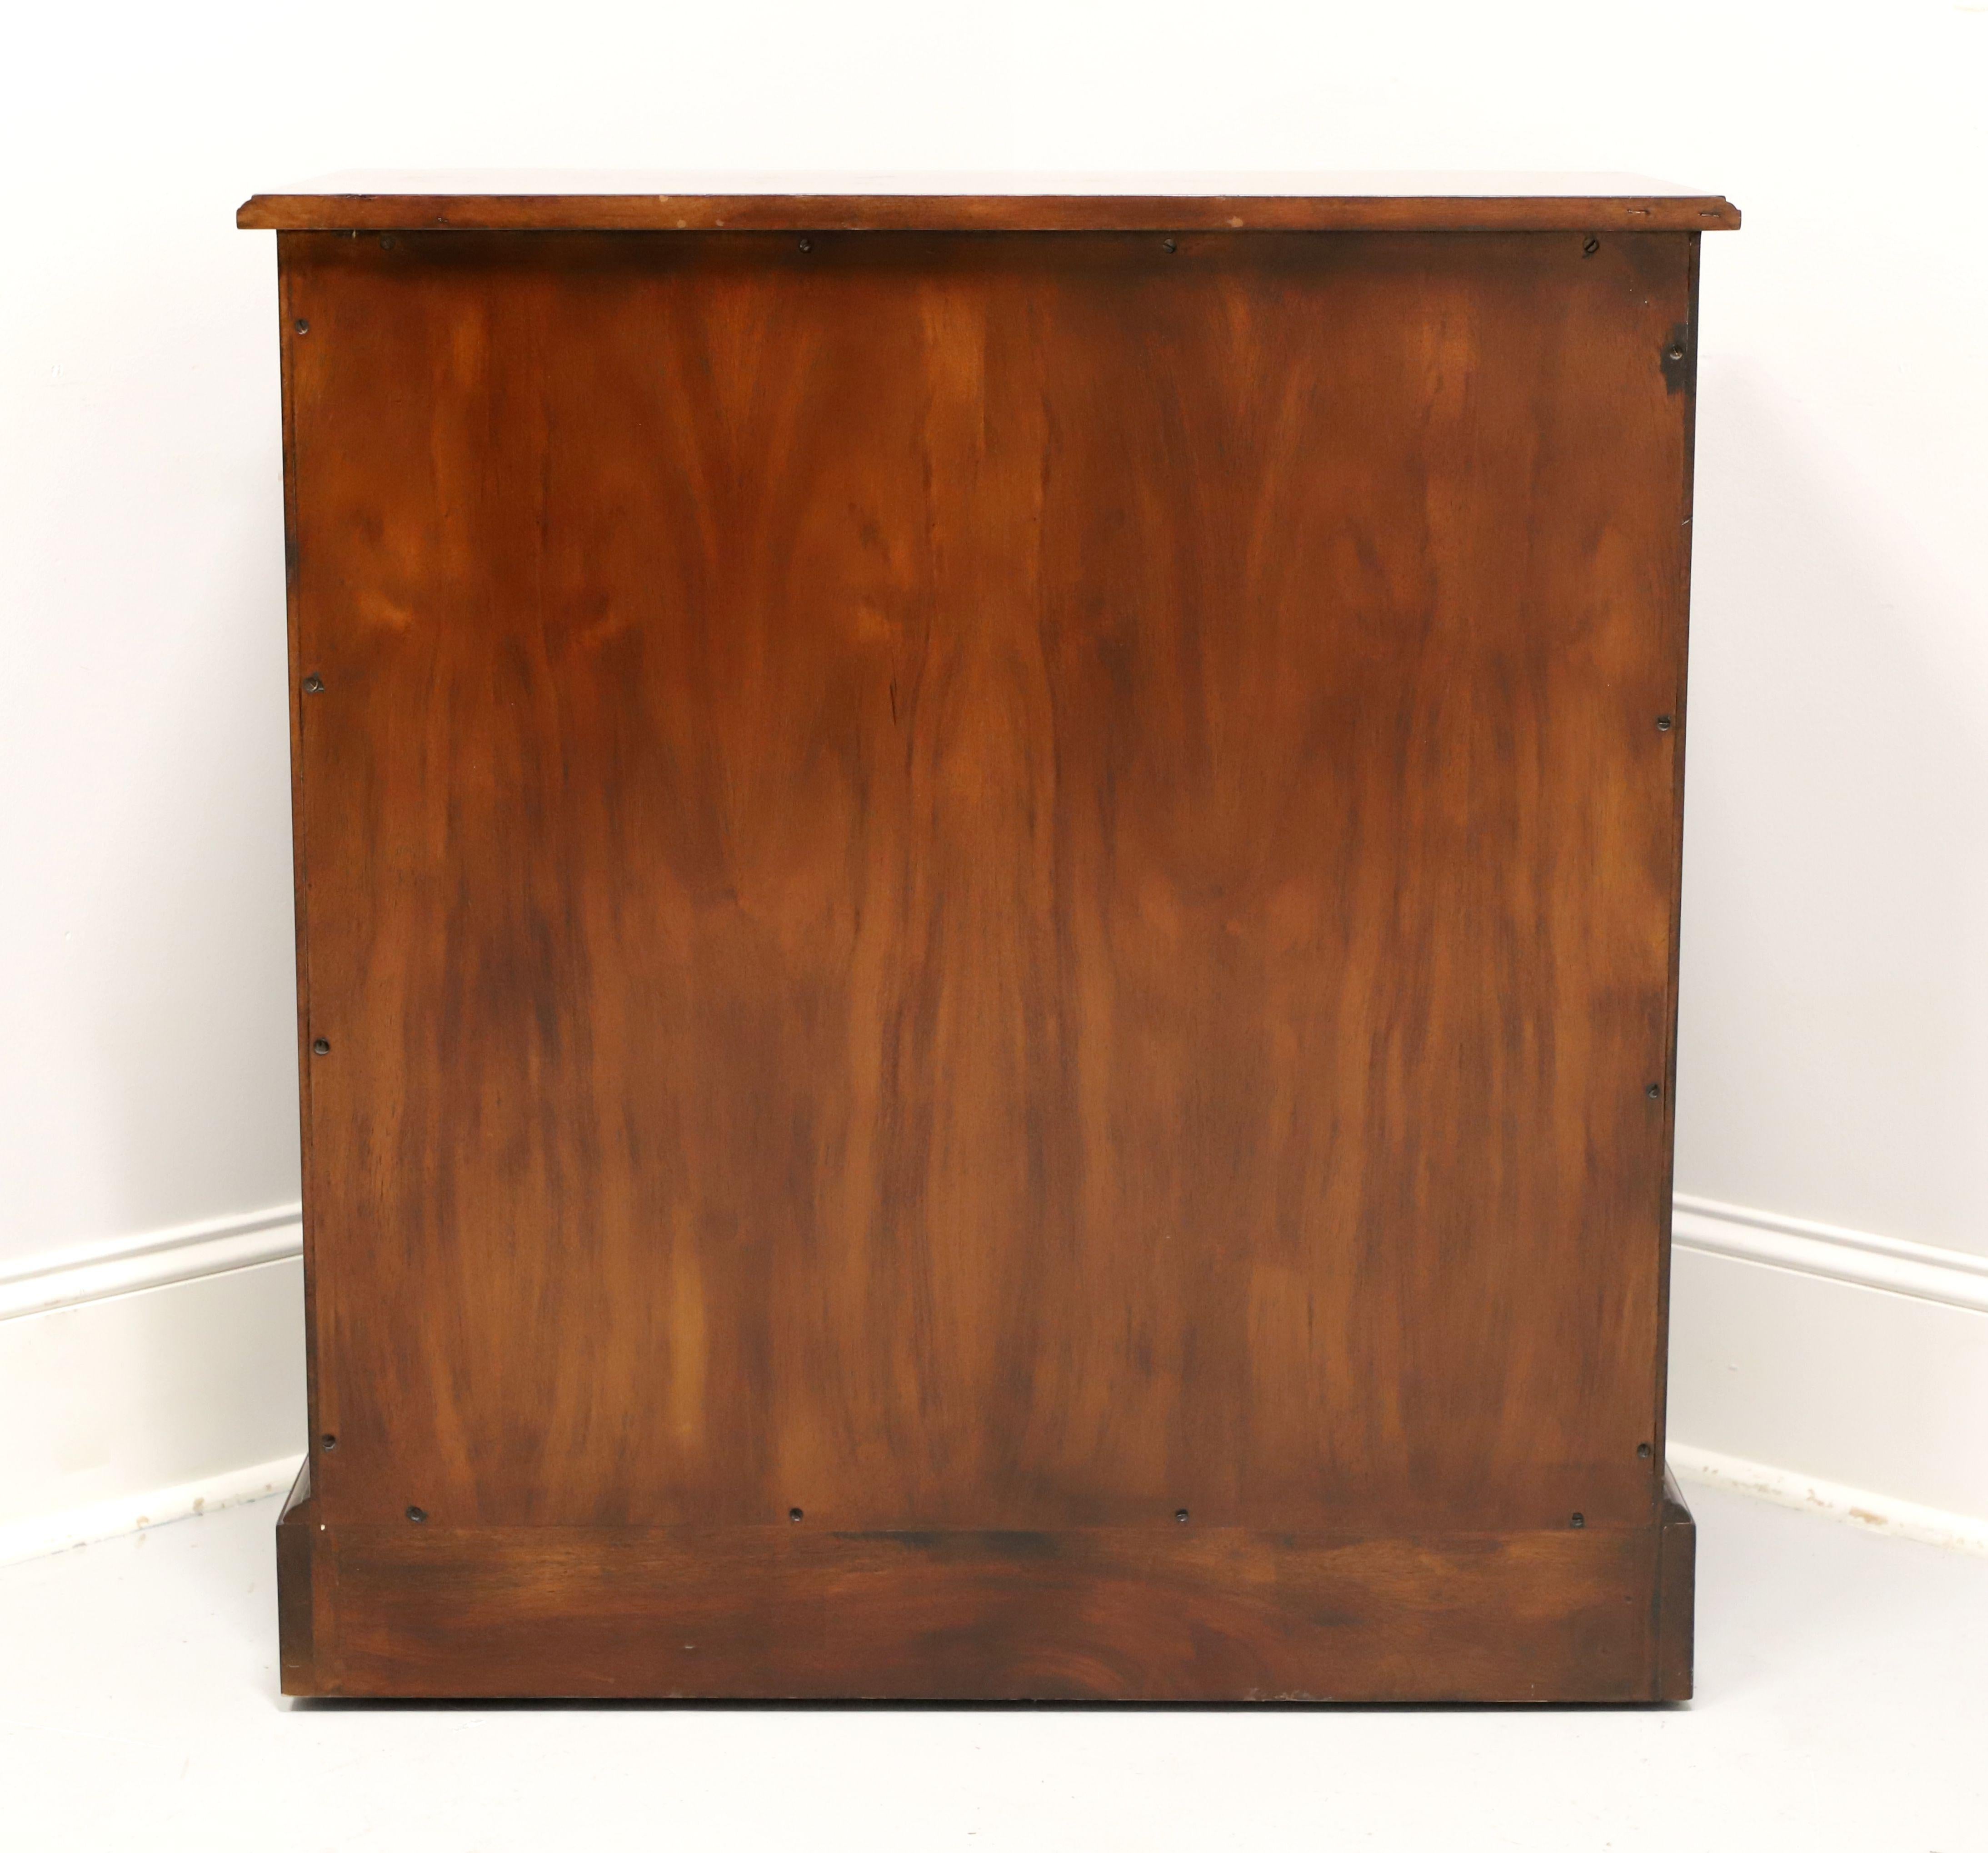 THEODORE ALEXANDER Rep•li•ca Burl Walnut Chippendale Bowfront Bachelor Chest In Good Condition For Sale In Charlotte, NC